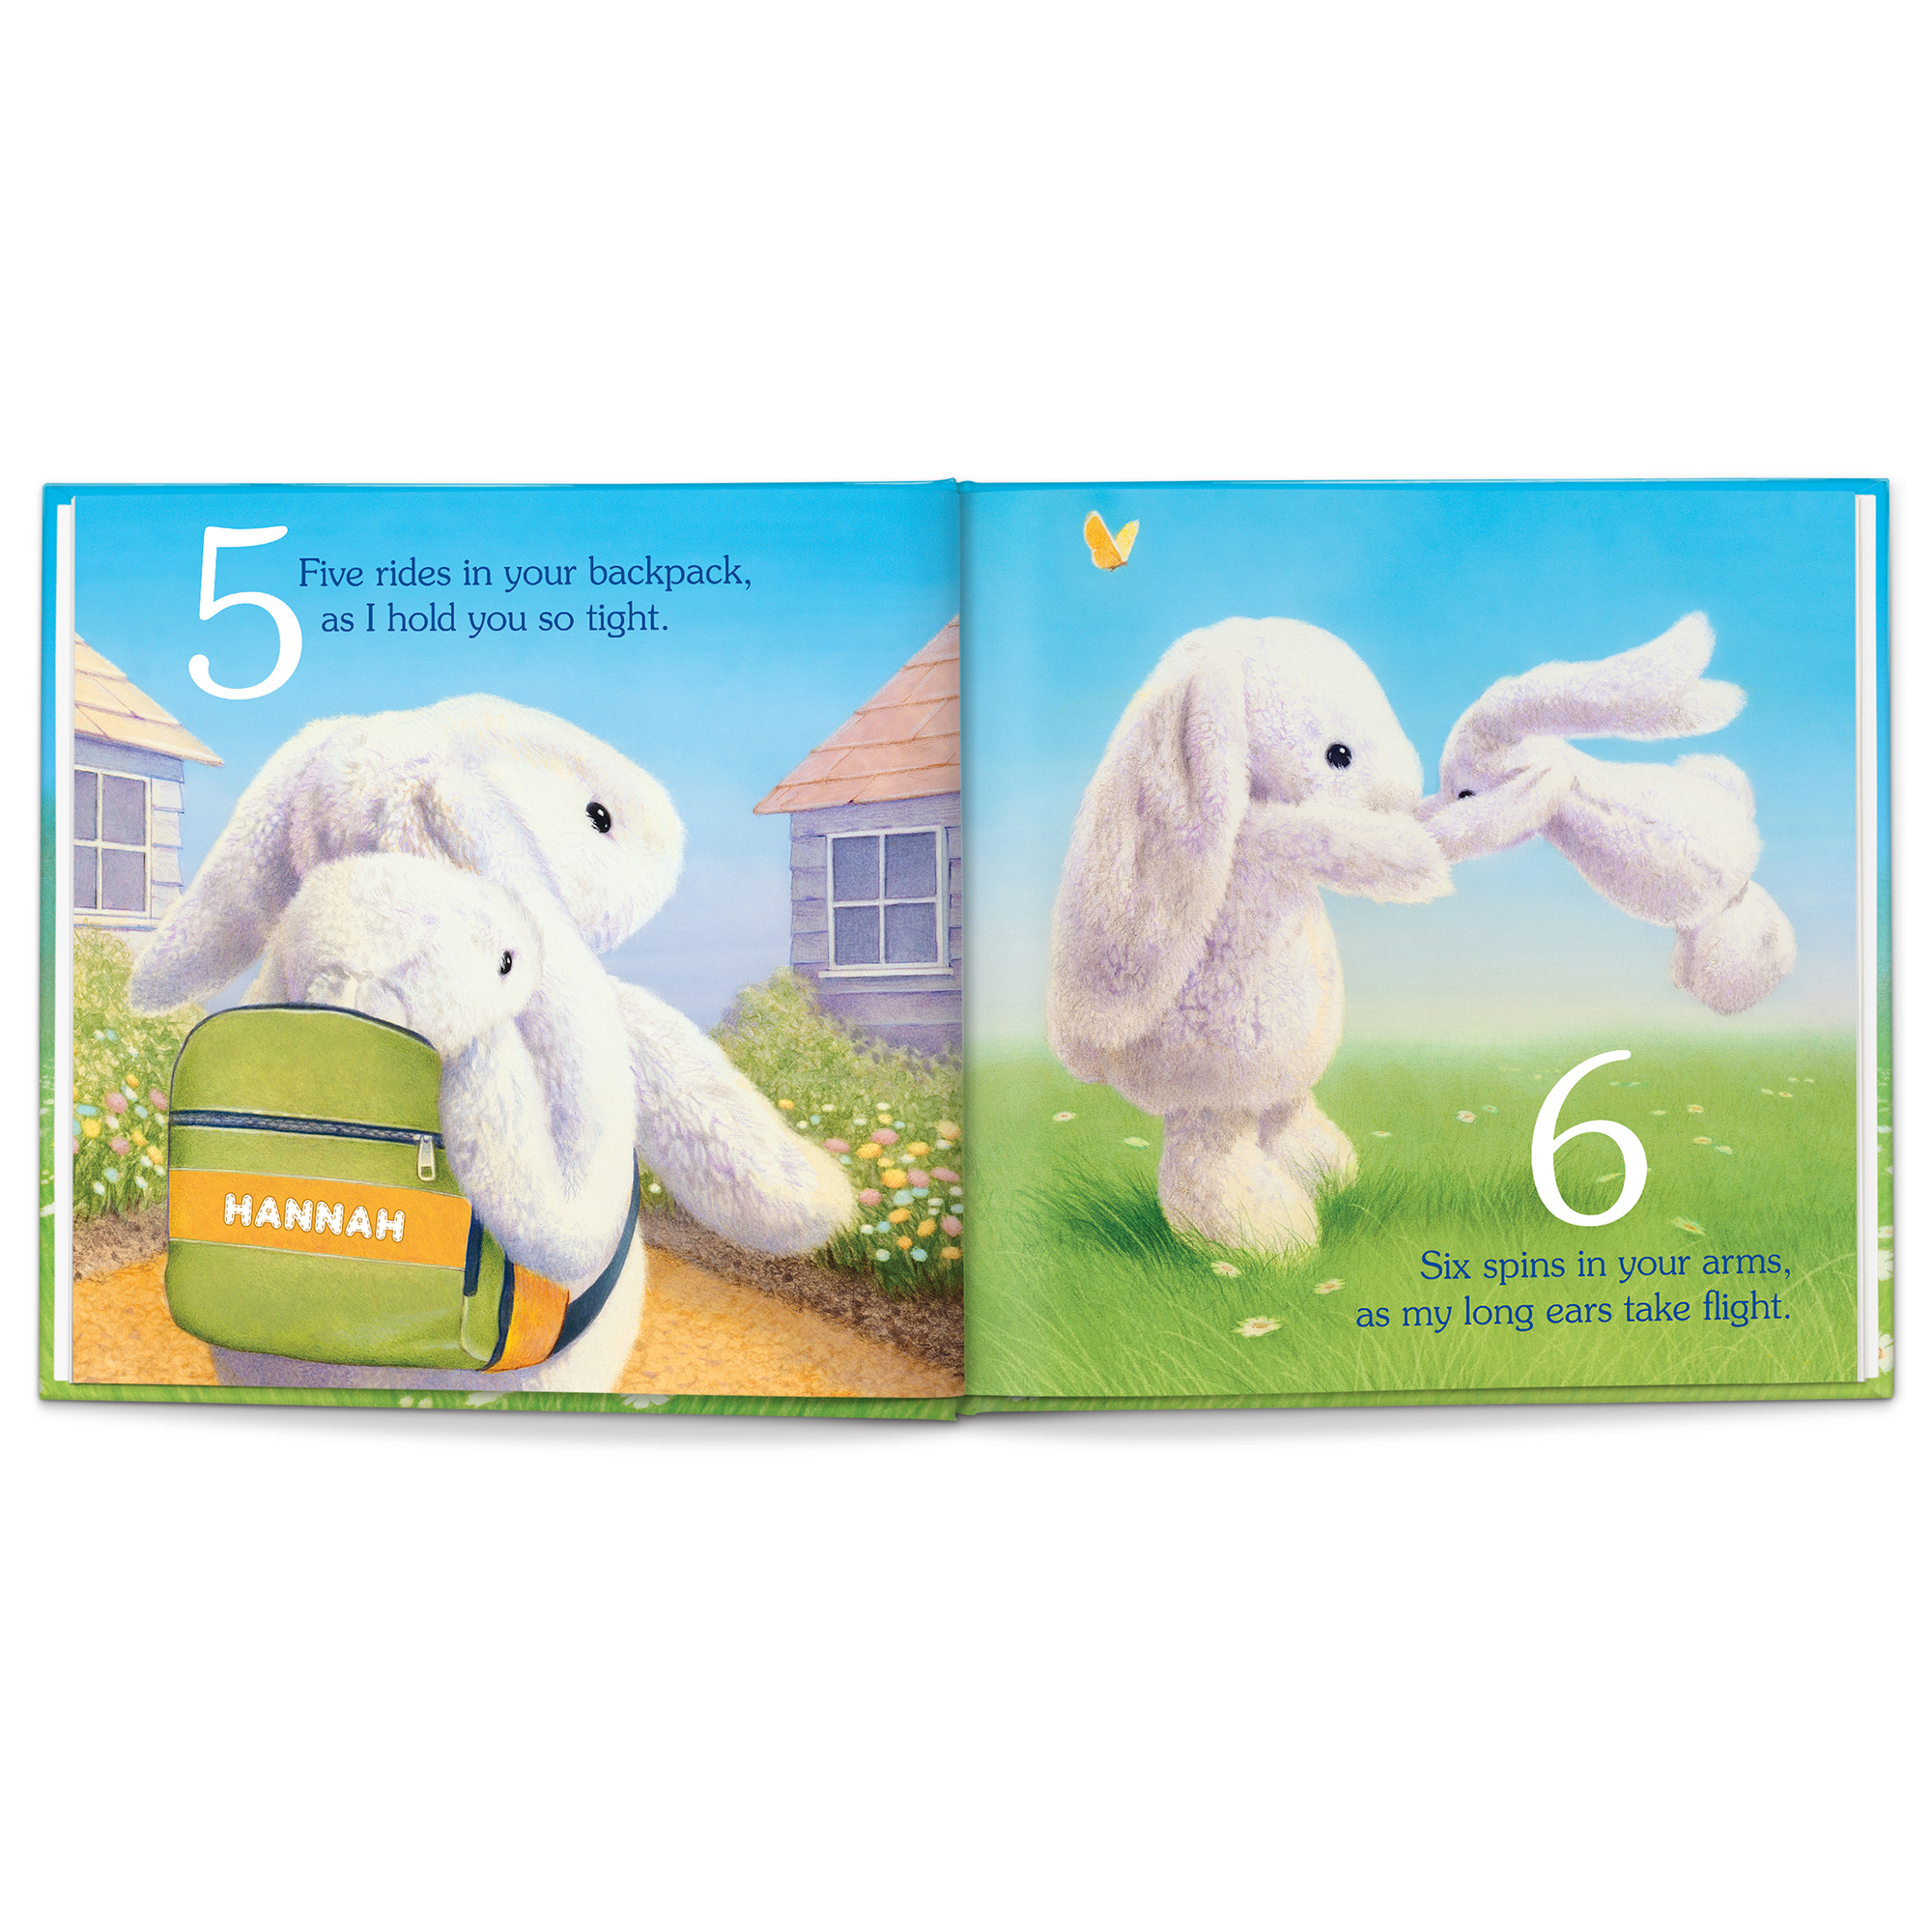 Personalised Storybook My Snuggle Bunny!